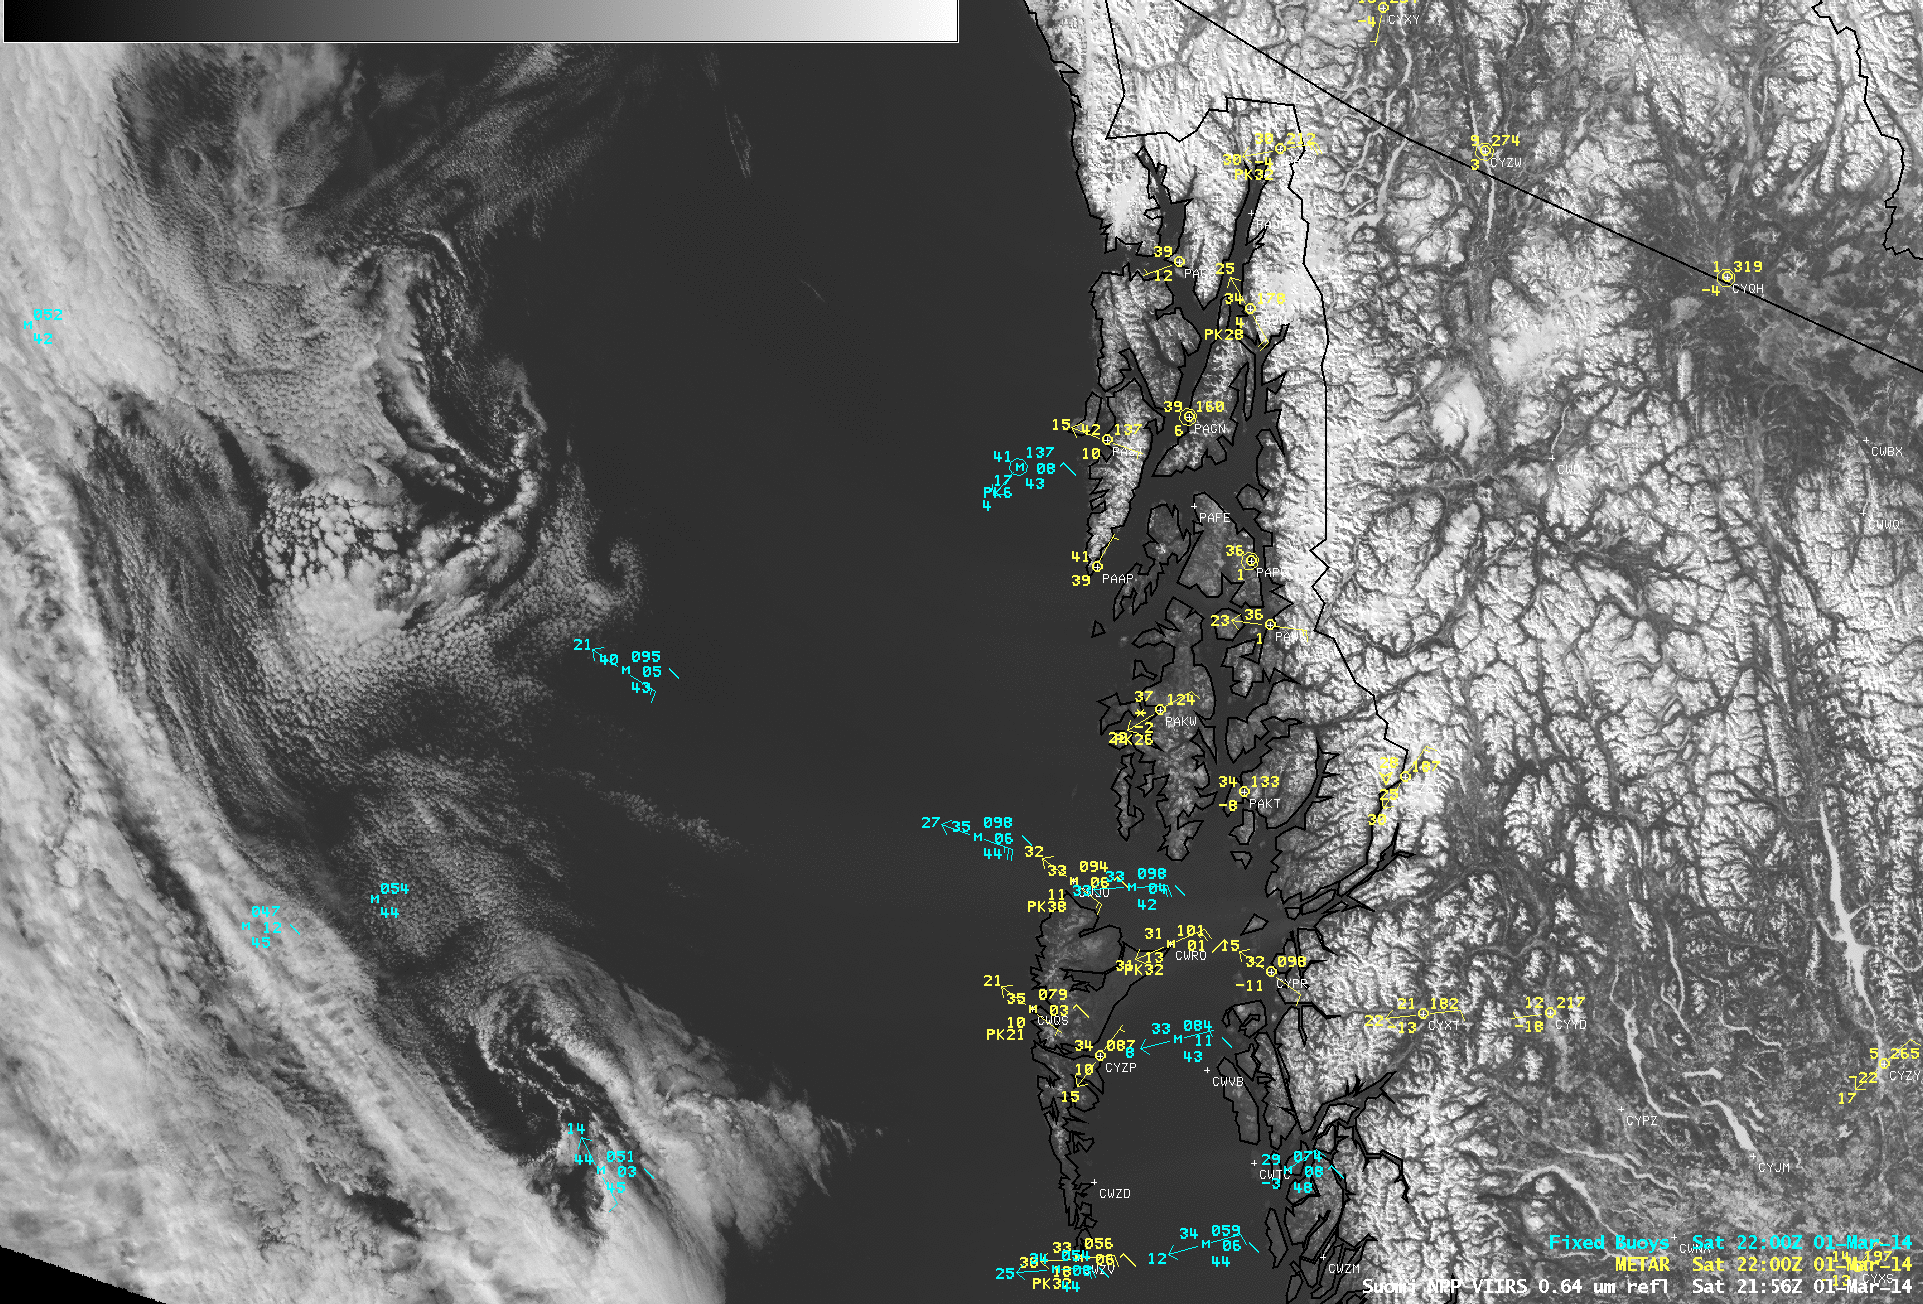 Suomi NPP VIIRS 0.64 Âµm visible channel and 0.7 Âµm Day/Night Band images